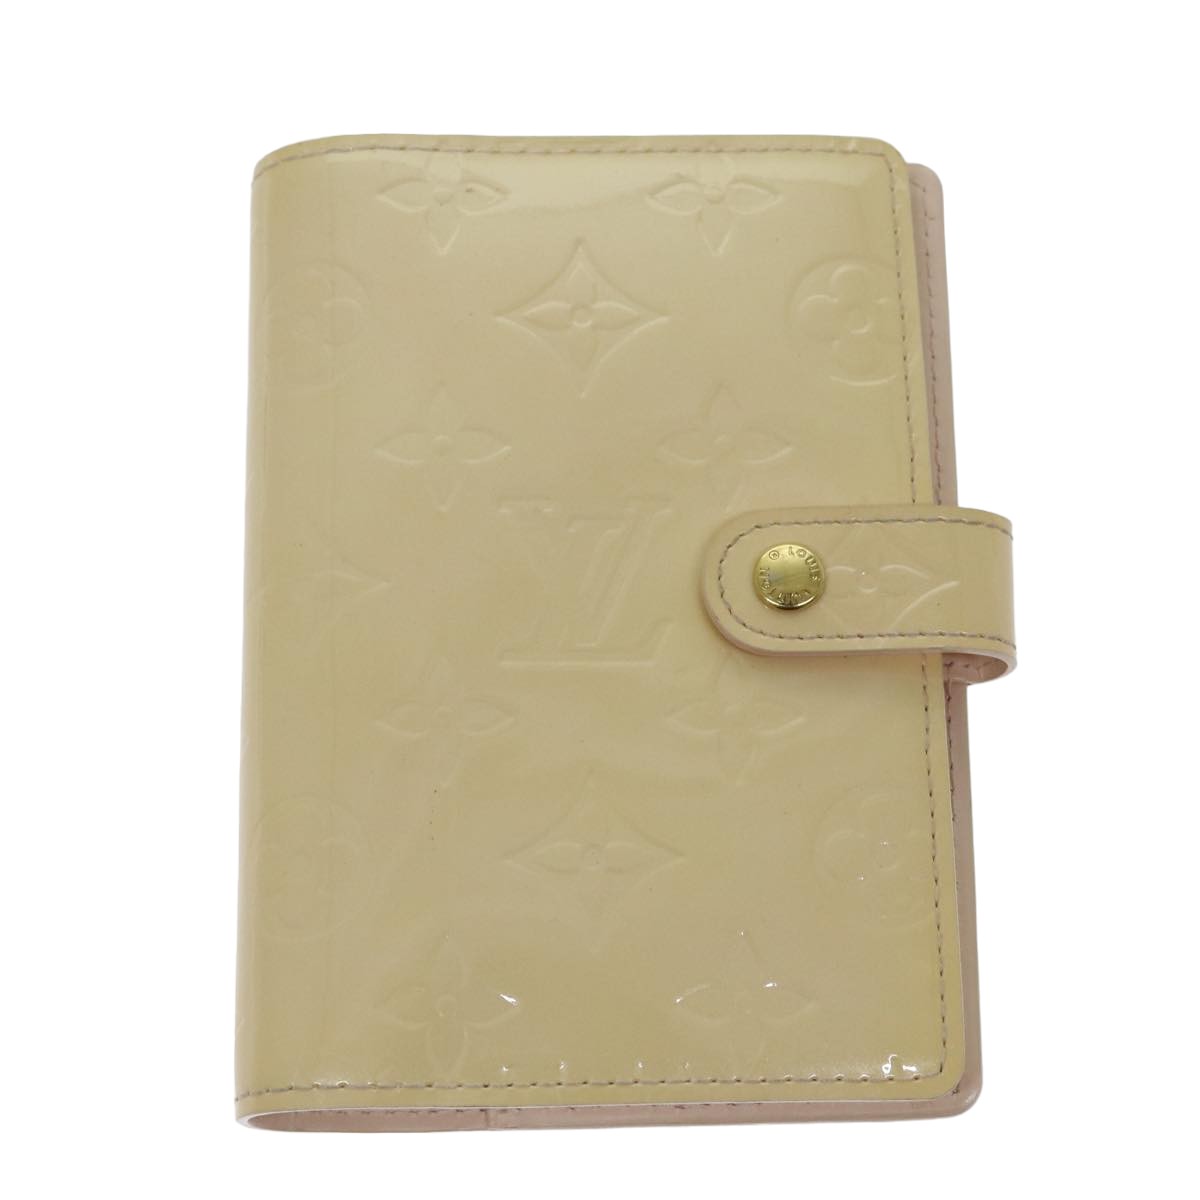 LOUIS VUITTON Vernis Agenda PM Day Planner Cover Pink R21007 LV Auth 75650